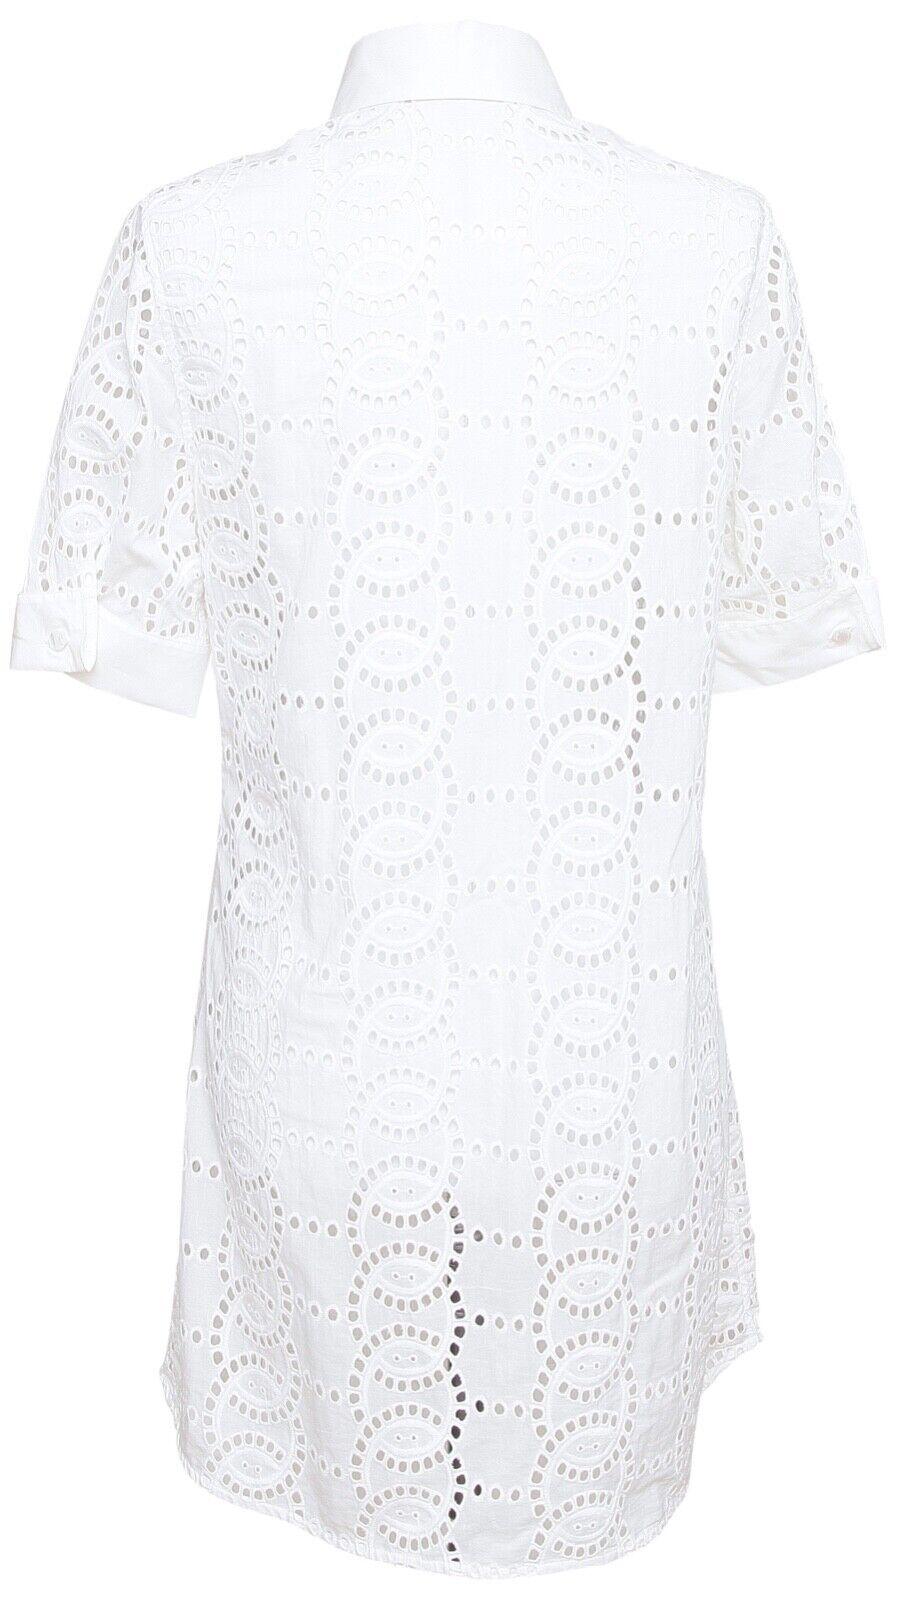 ANNE FONTAINE Shirt Dress White Short Sleeve Button Down Eyelet Collar Cotton 40 For Sale 3